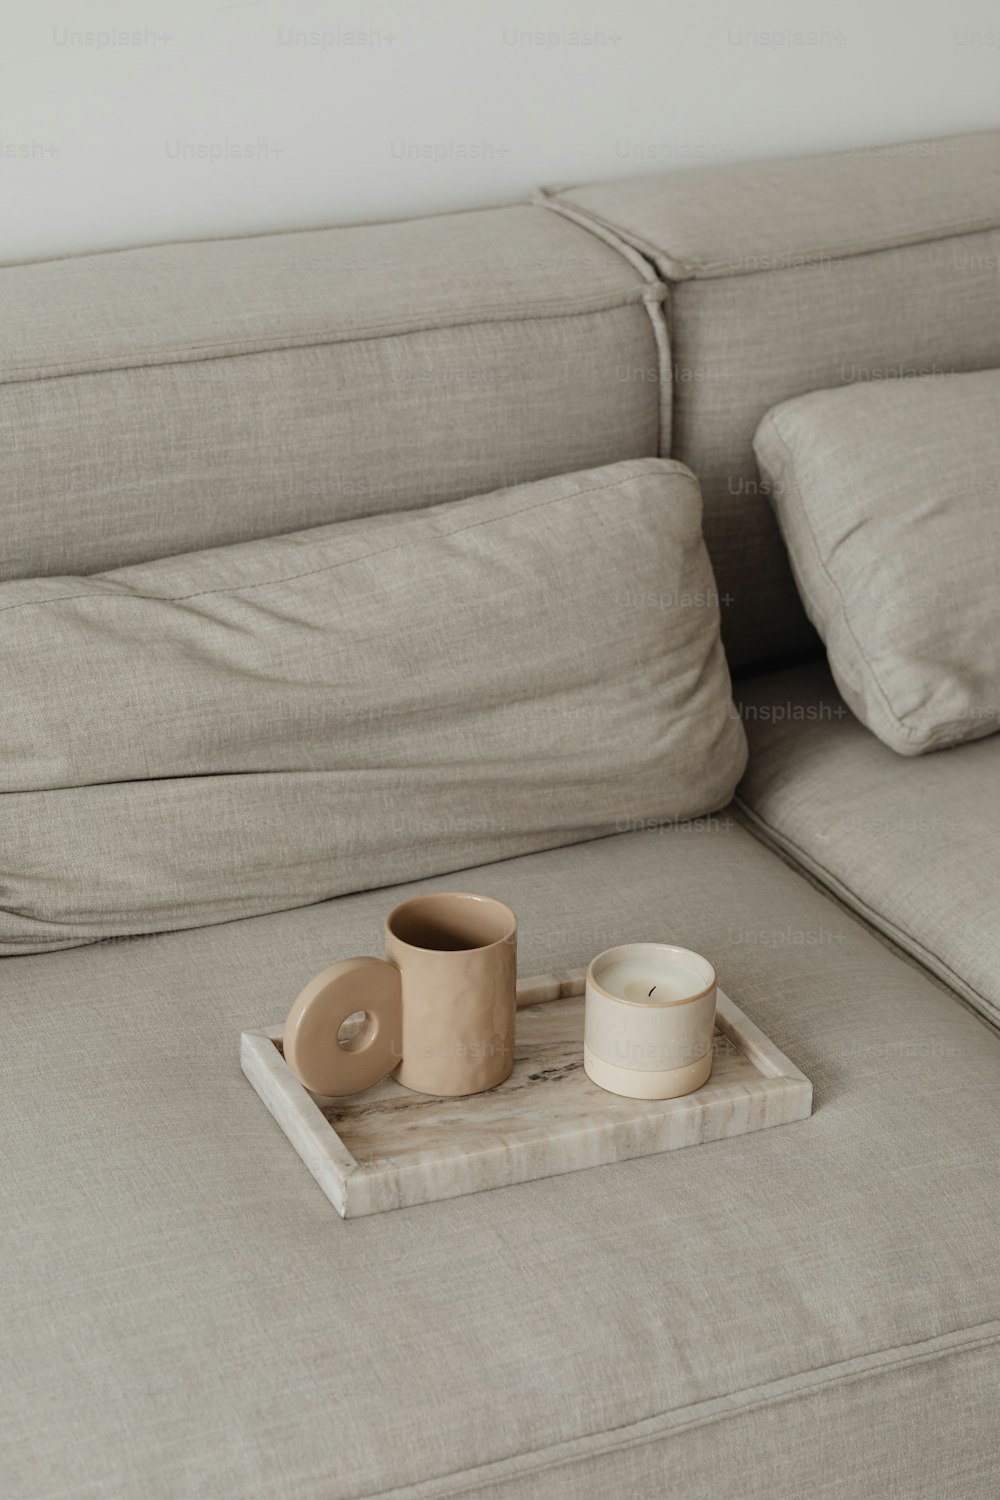 a tray with a cup and a candle on a couch